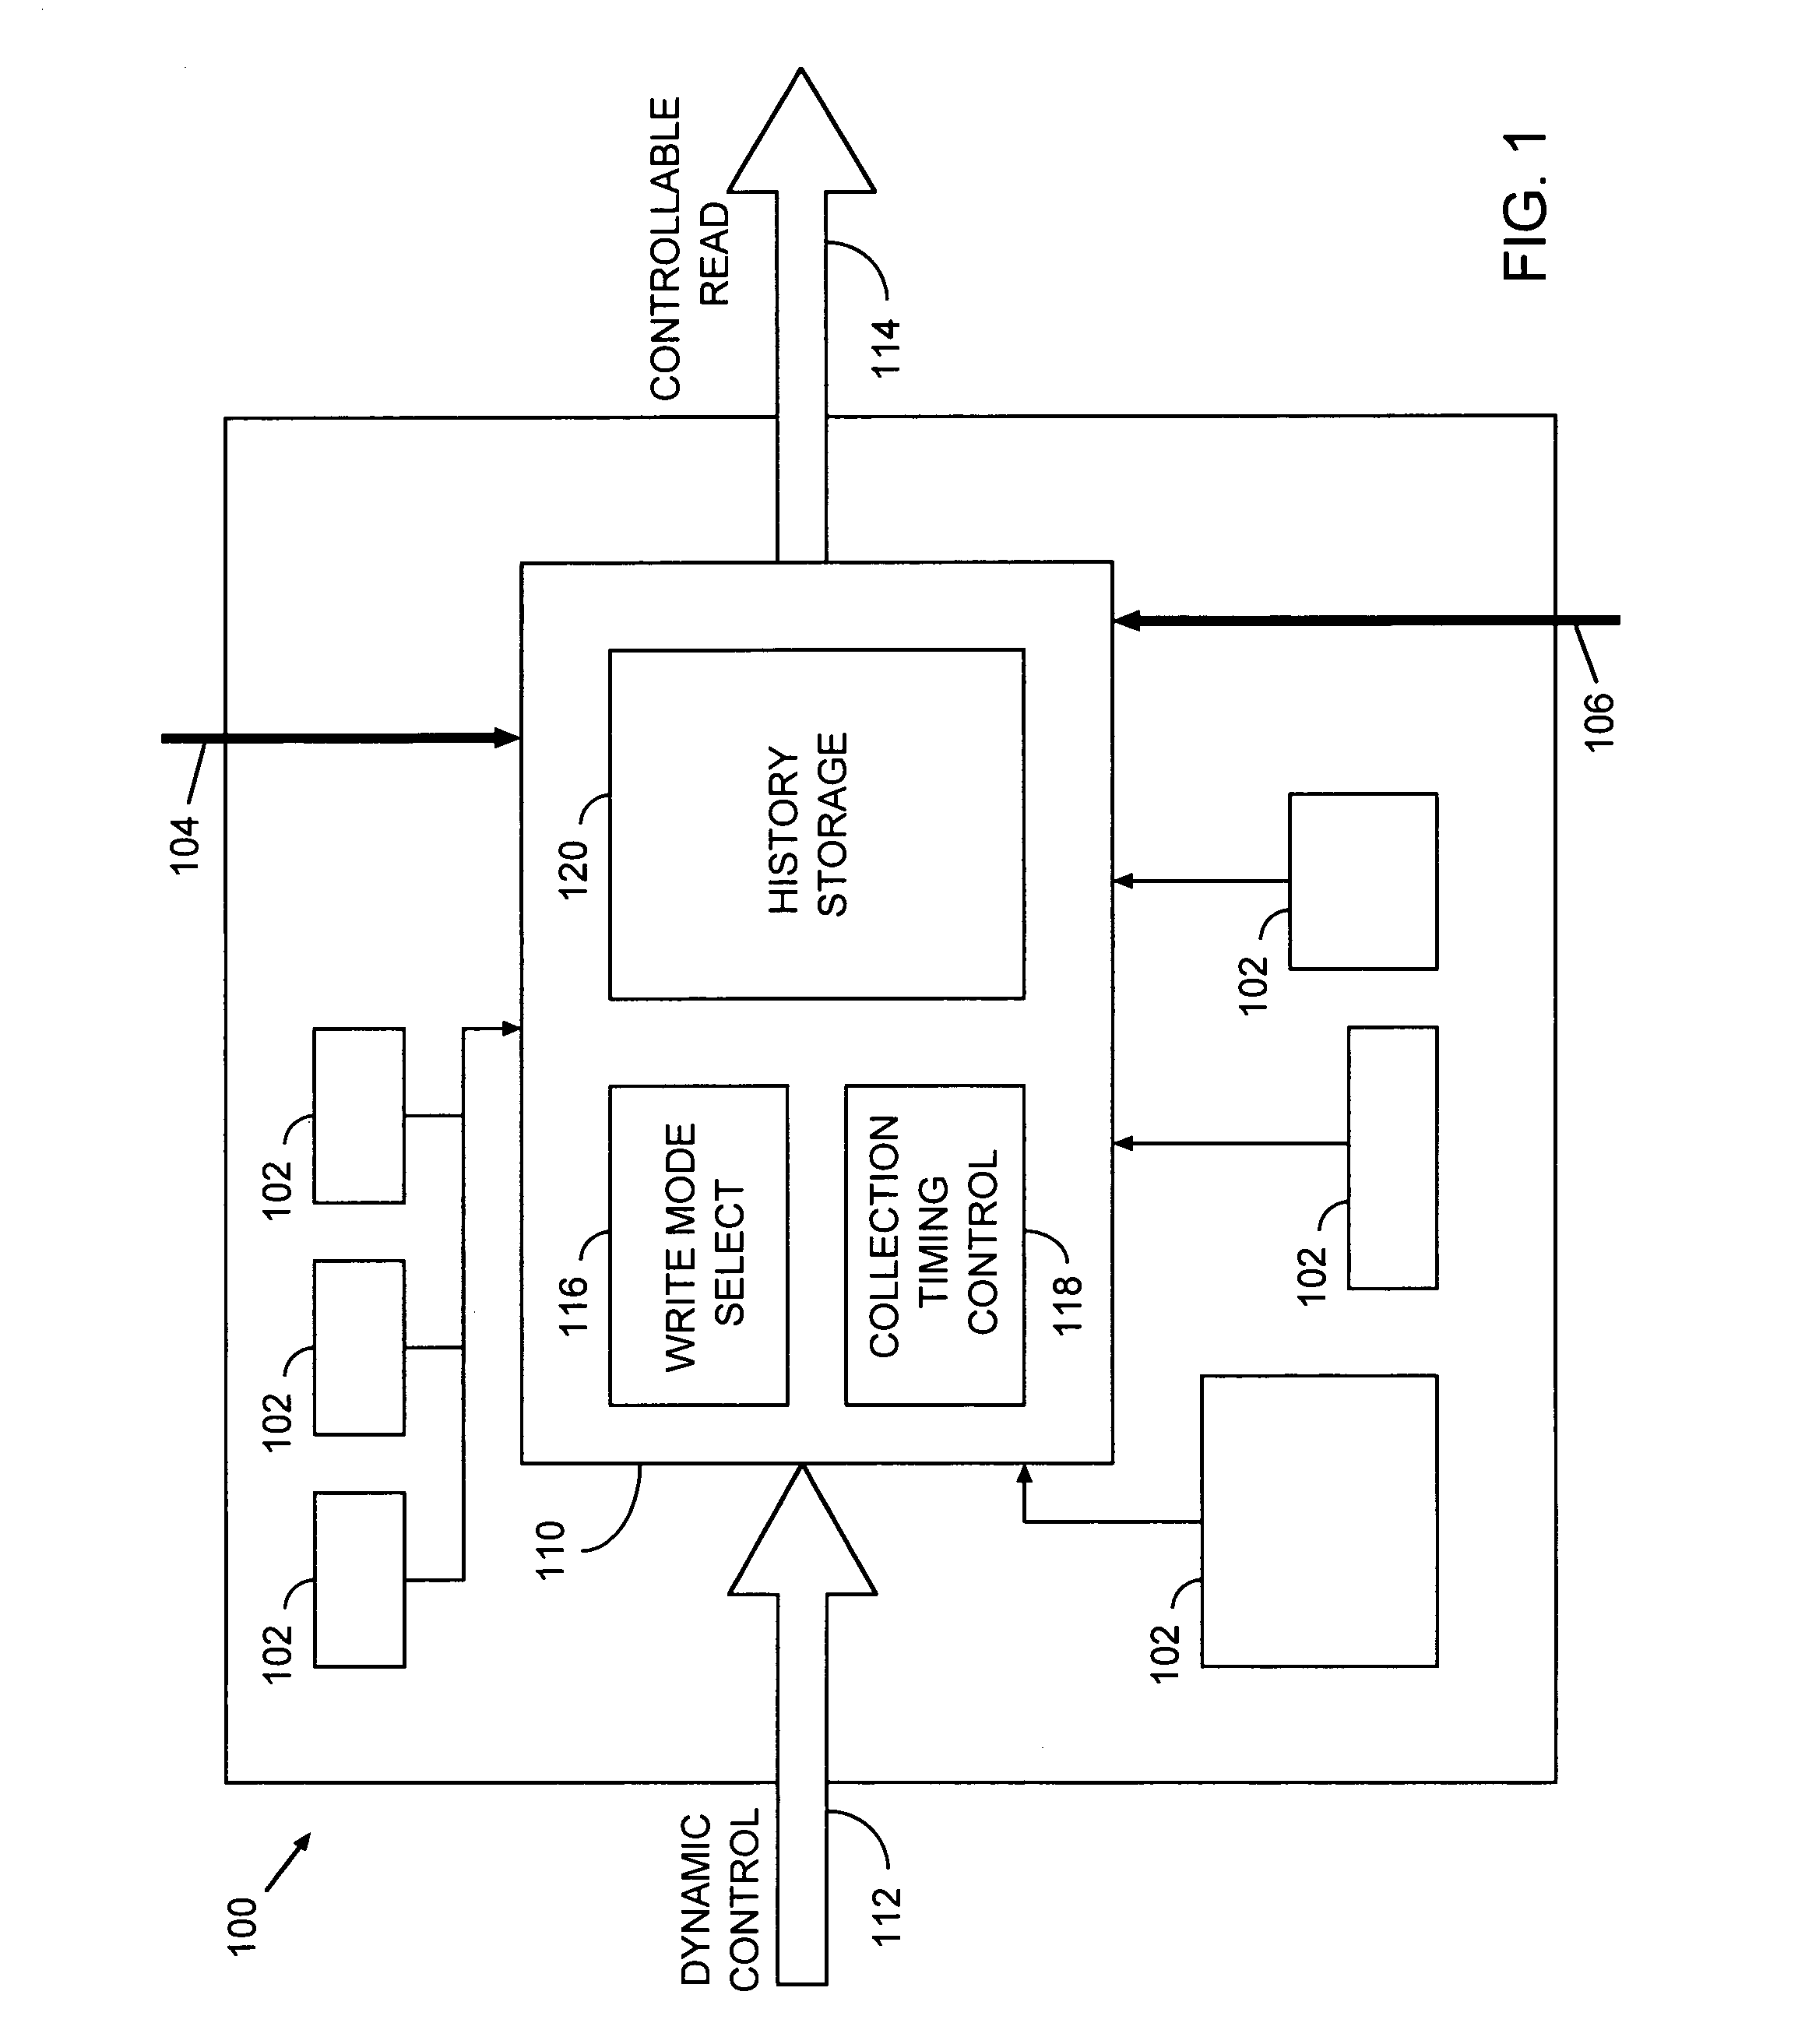 Method for controlling and collecting information in a data processing system